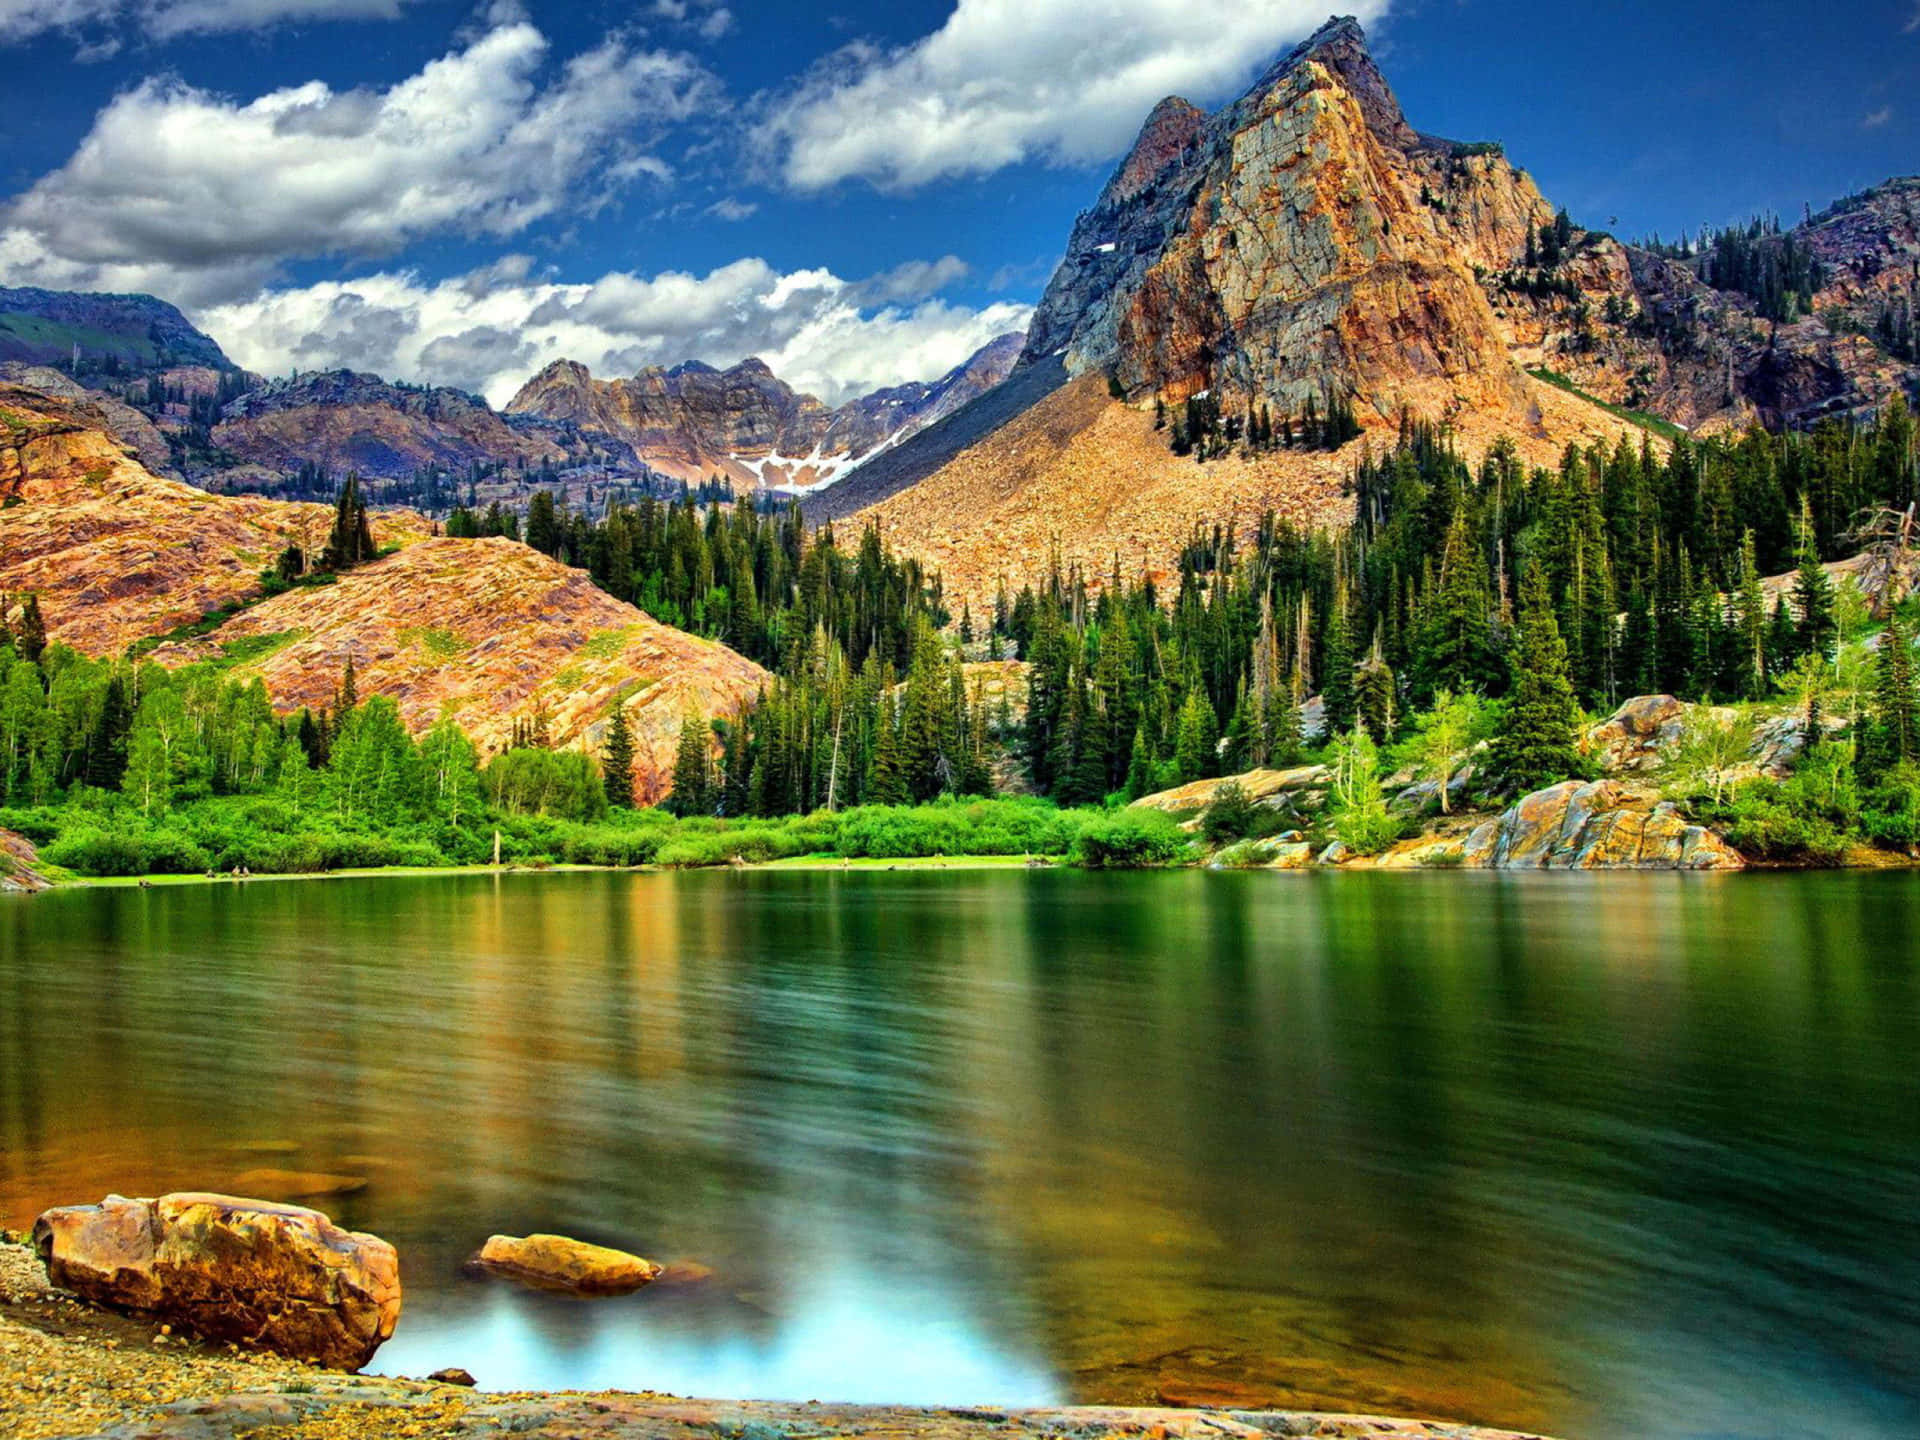 The Majestic Beauty of Nature Wallpaper